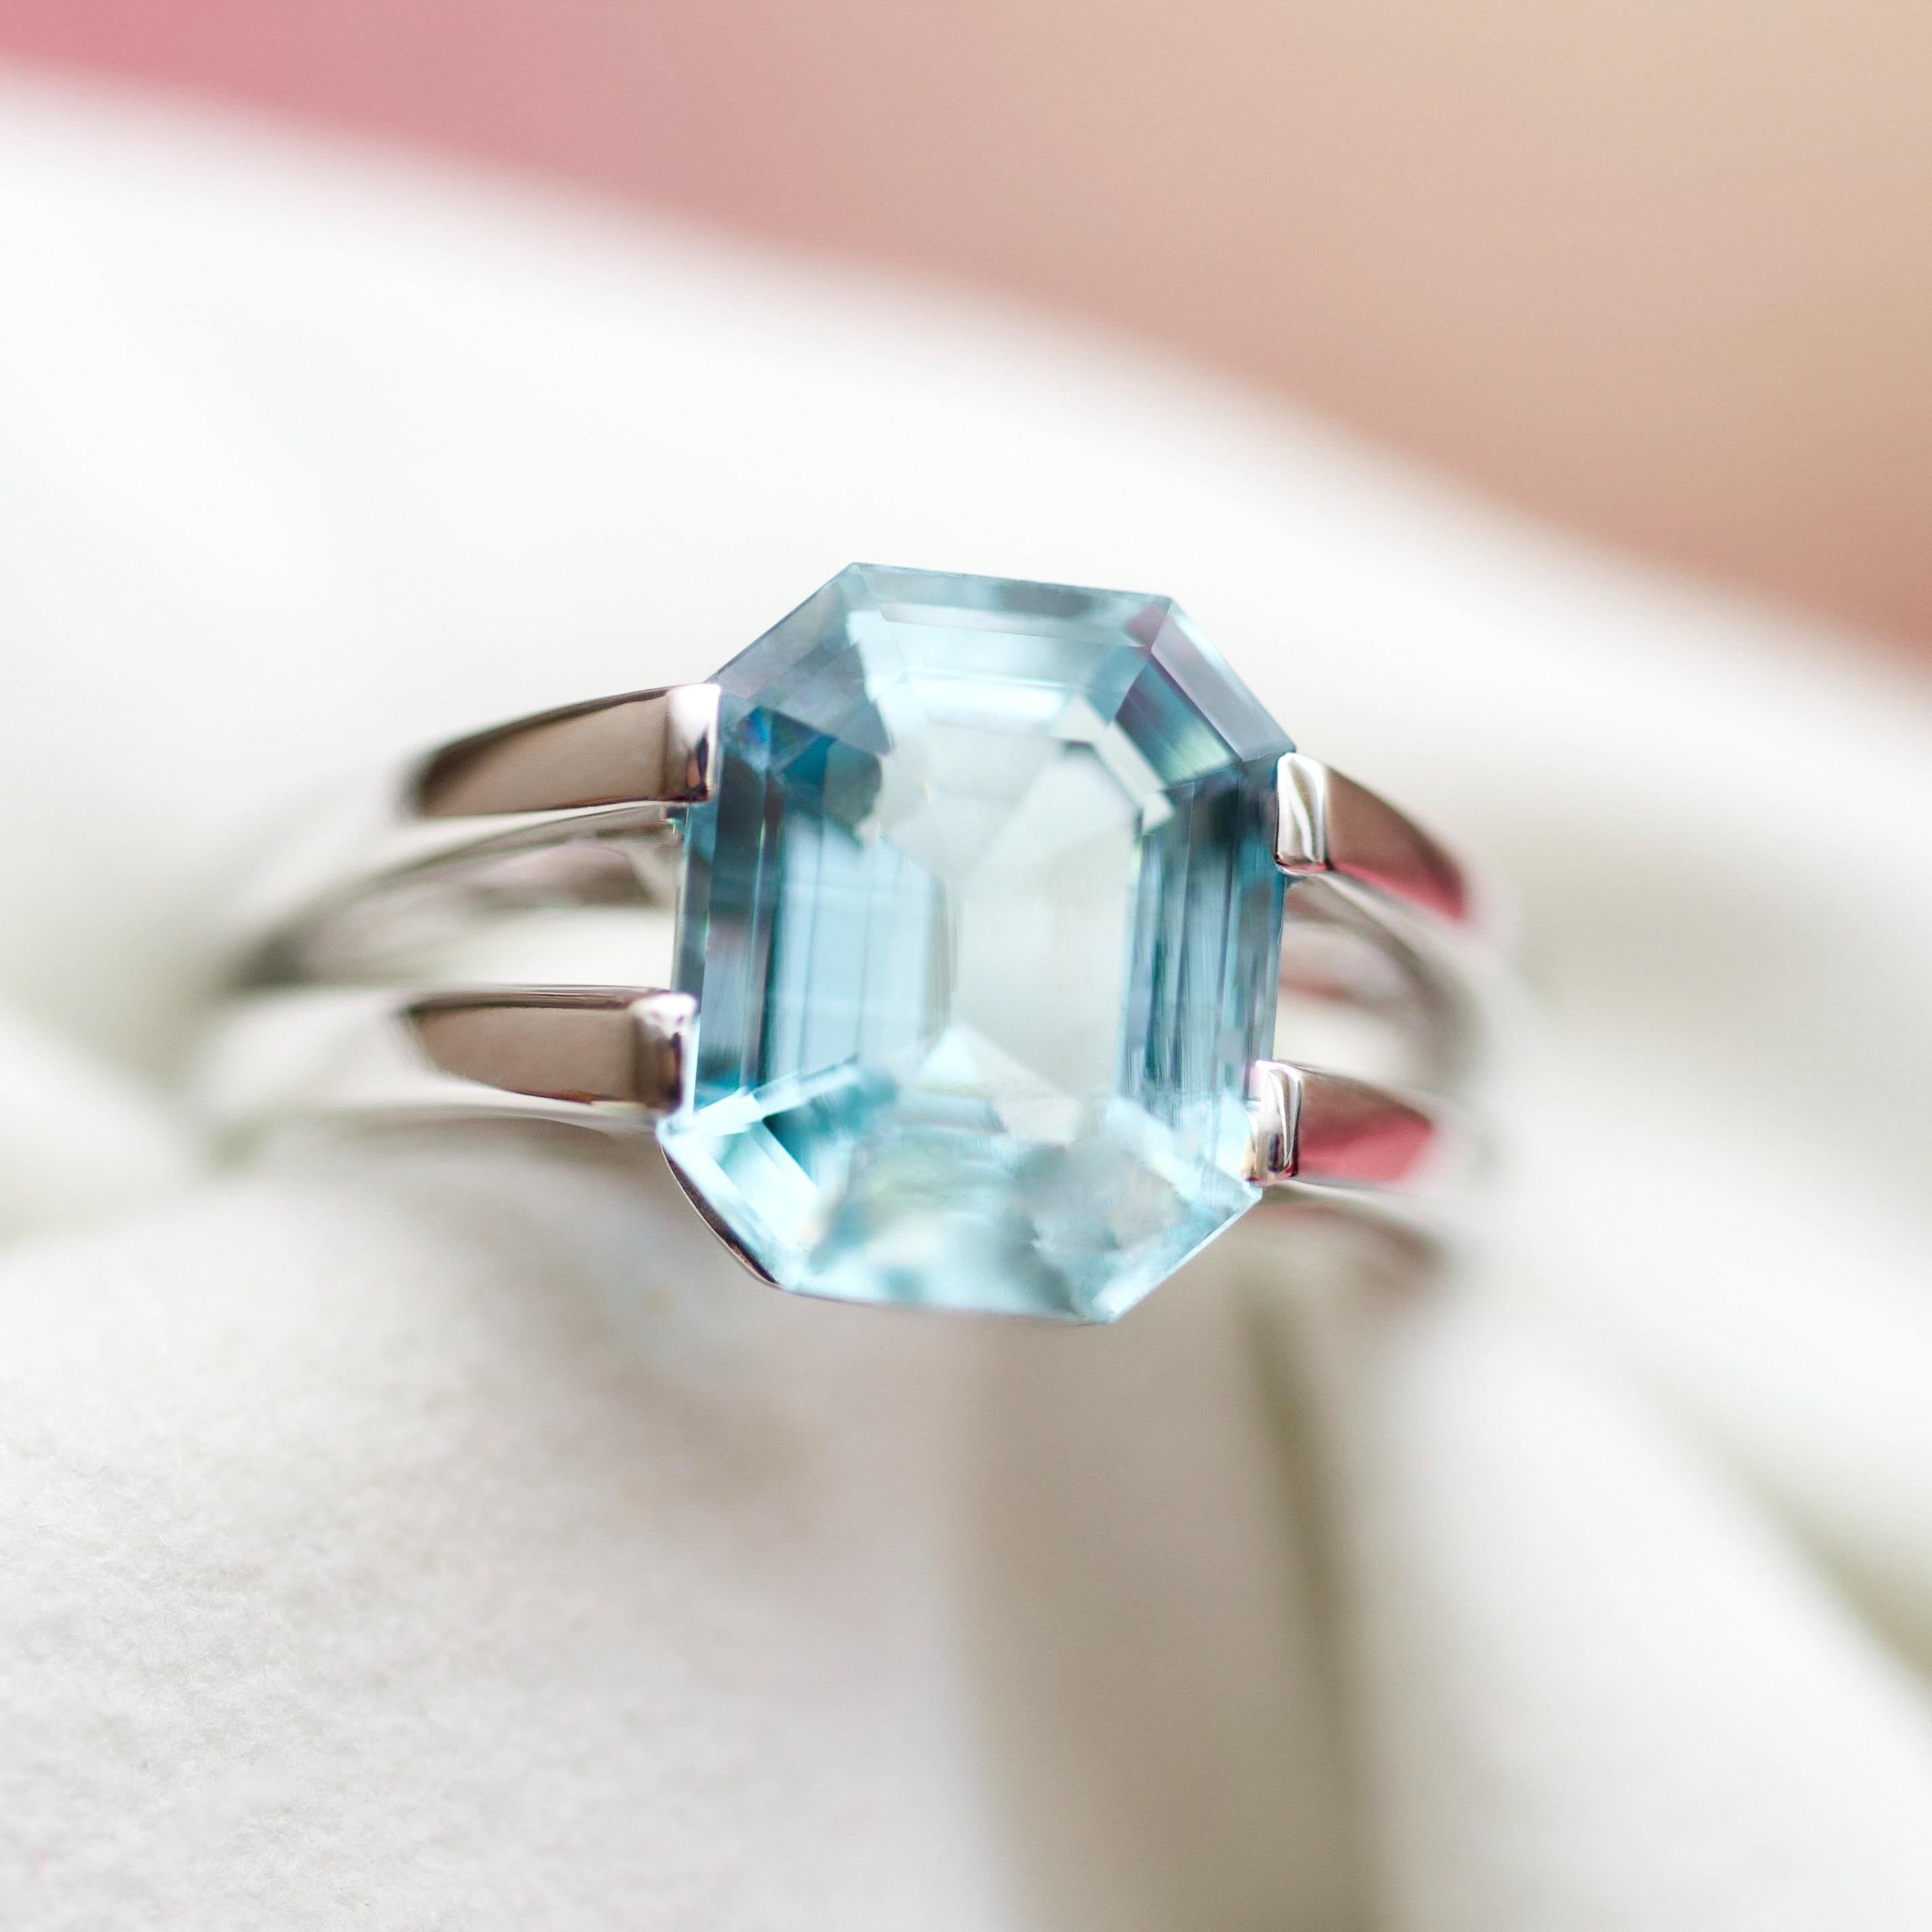 Aquamarine - one of the most famous and beautiful gemstones on the planet. Some facts about this stone:
- it's natural beryl variety
- colors could be from greenish-blue to intense blue 
- could be used for casual jewelry 
- could be found in big